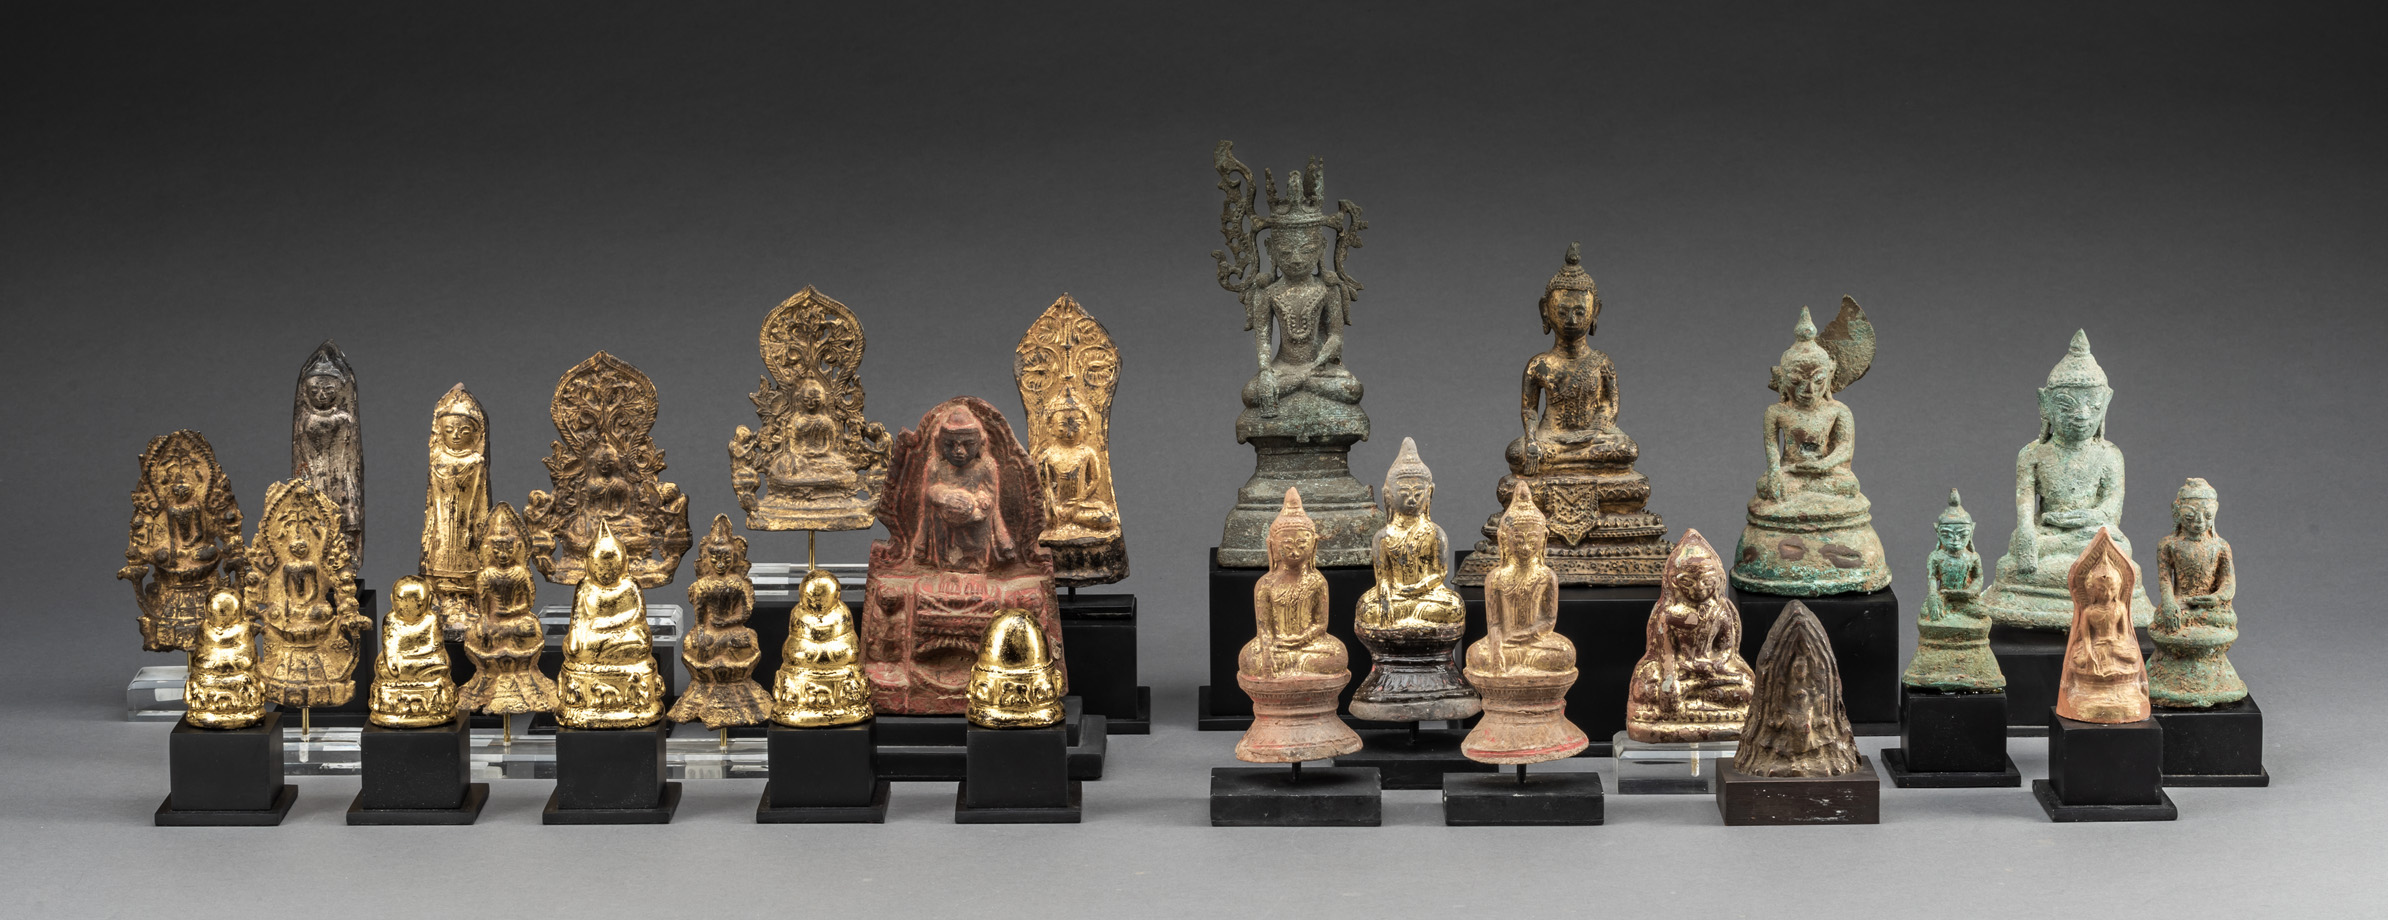 A Collection of 58 Clay & Metal Buddhist Votives Burma Myanmar,18th -19th Century